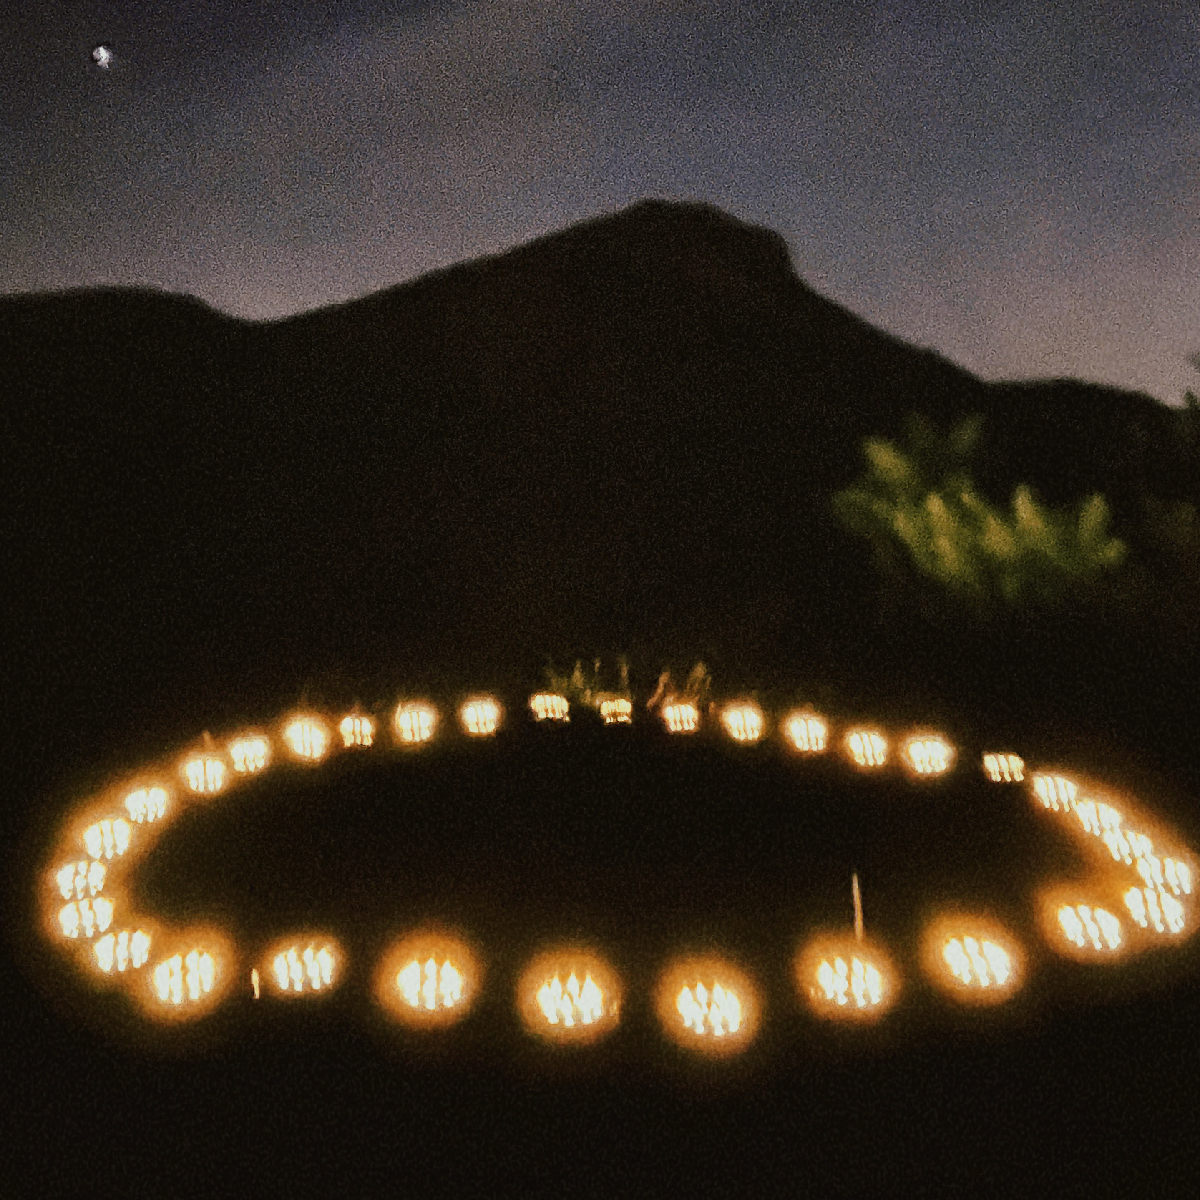 A ring of solar powered lights in a garden at night.